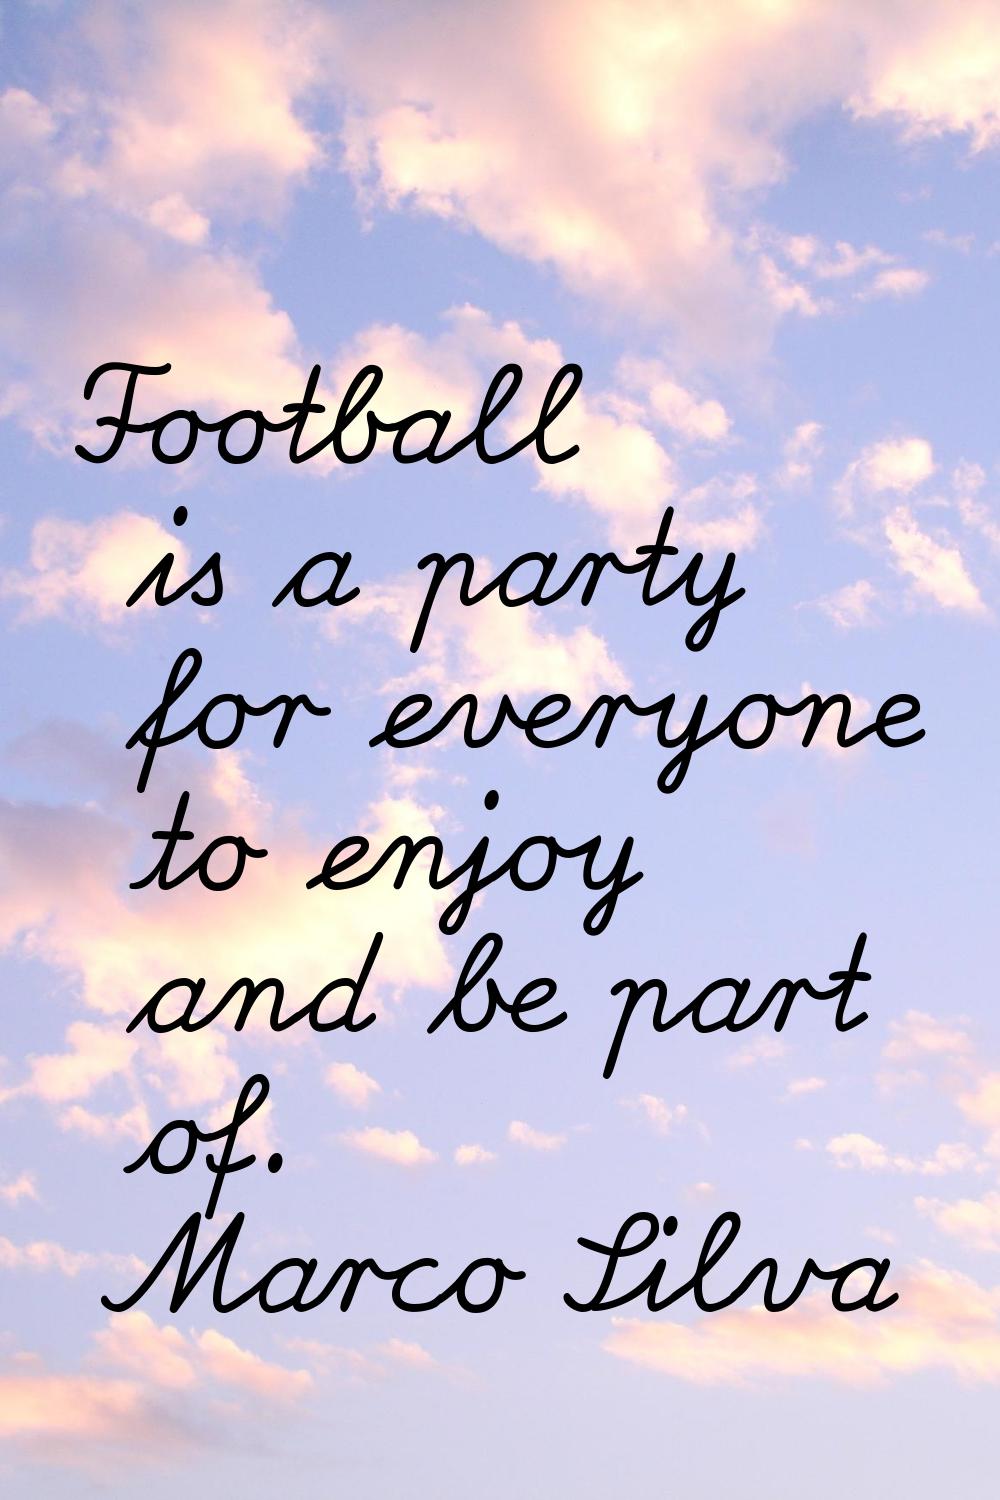 Football is a party for everyone to enjoy and be part of.